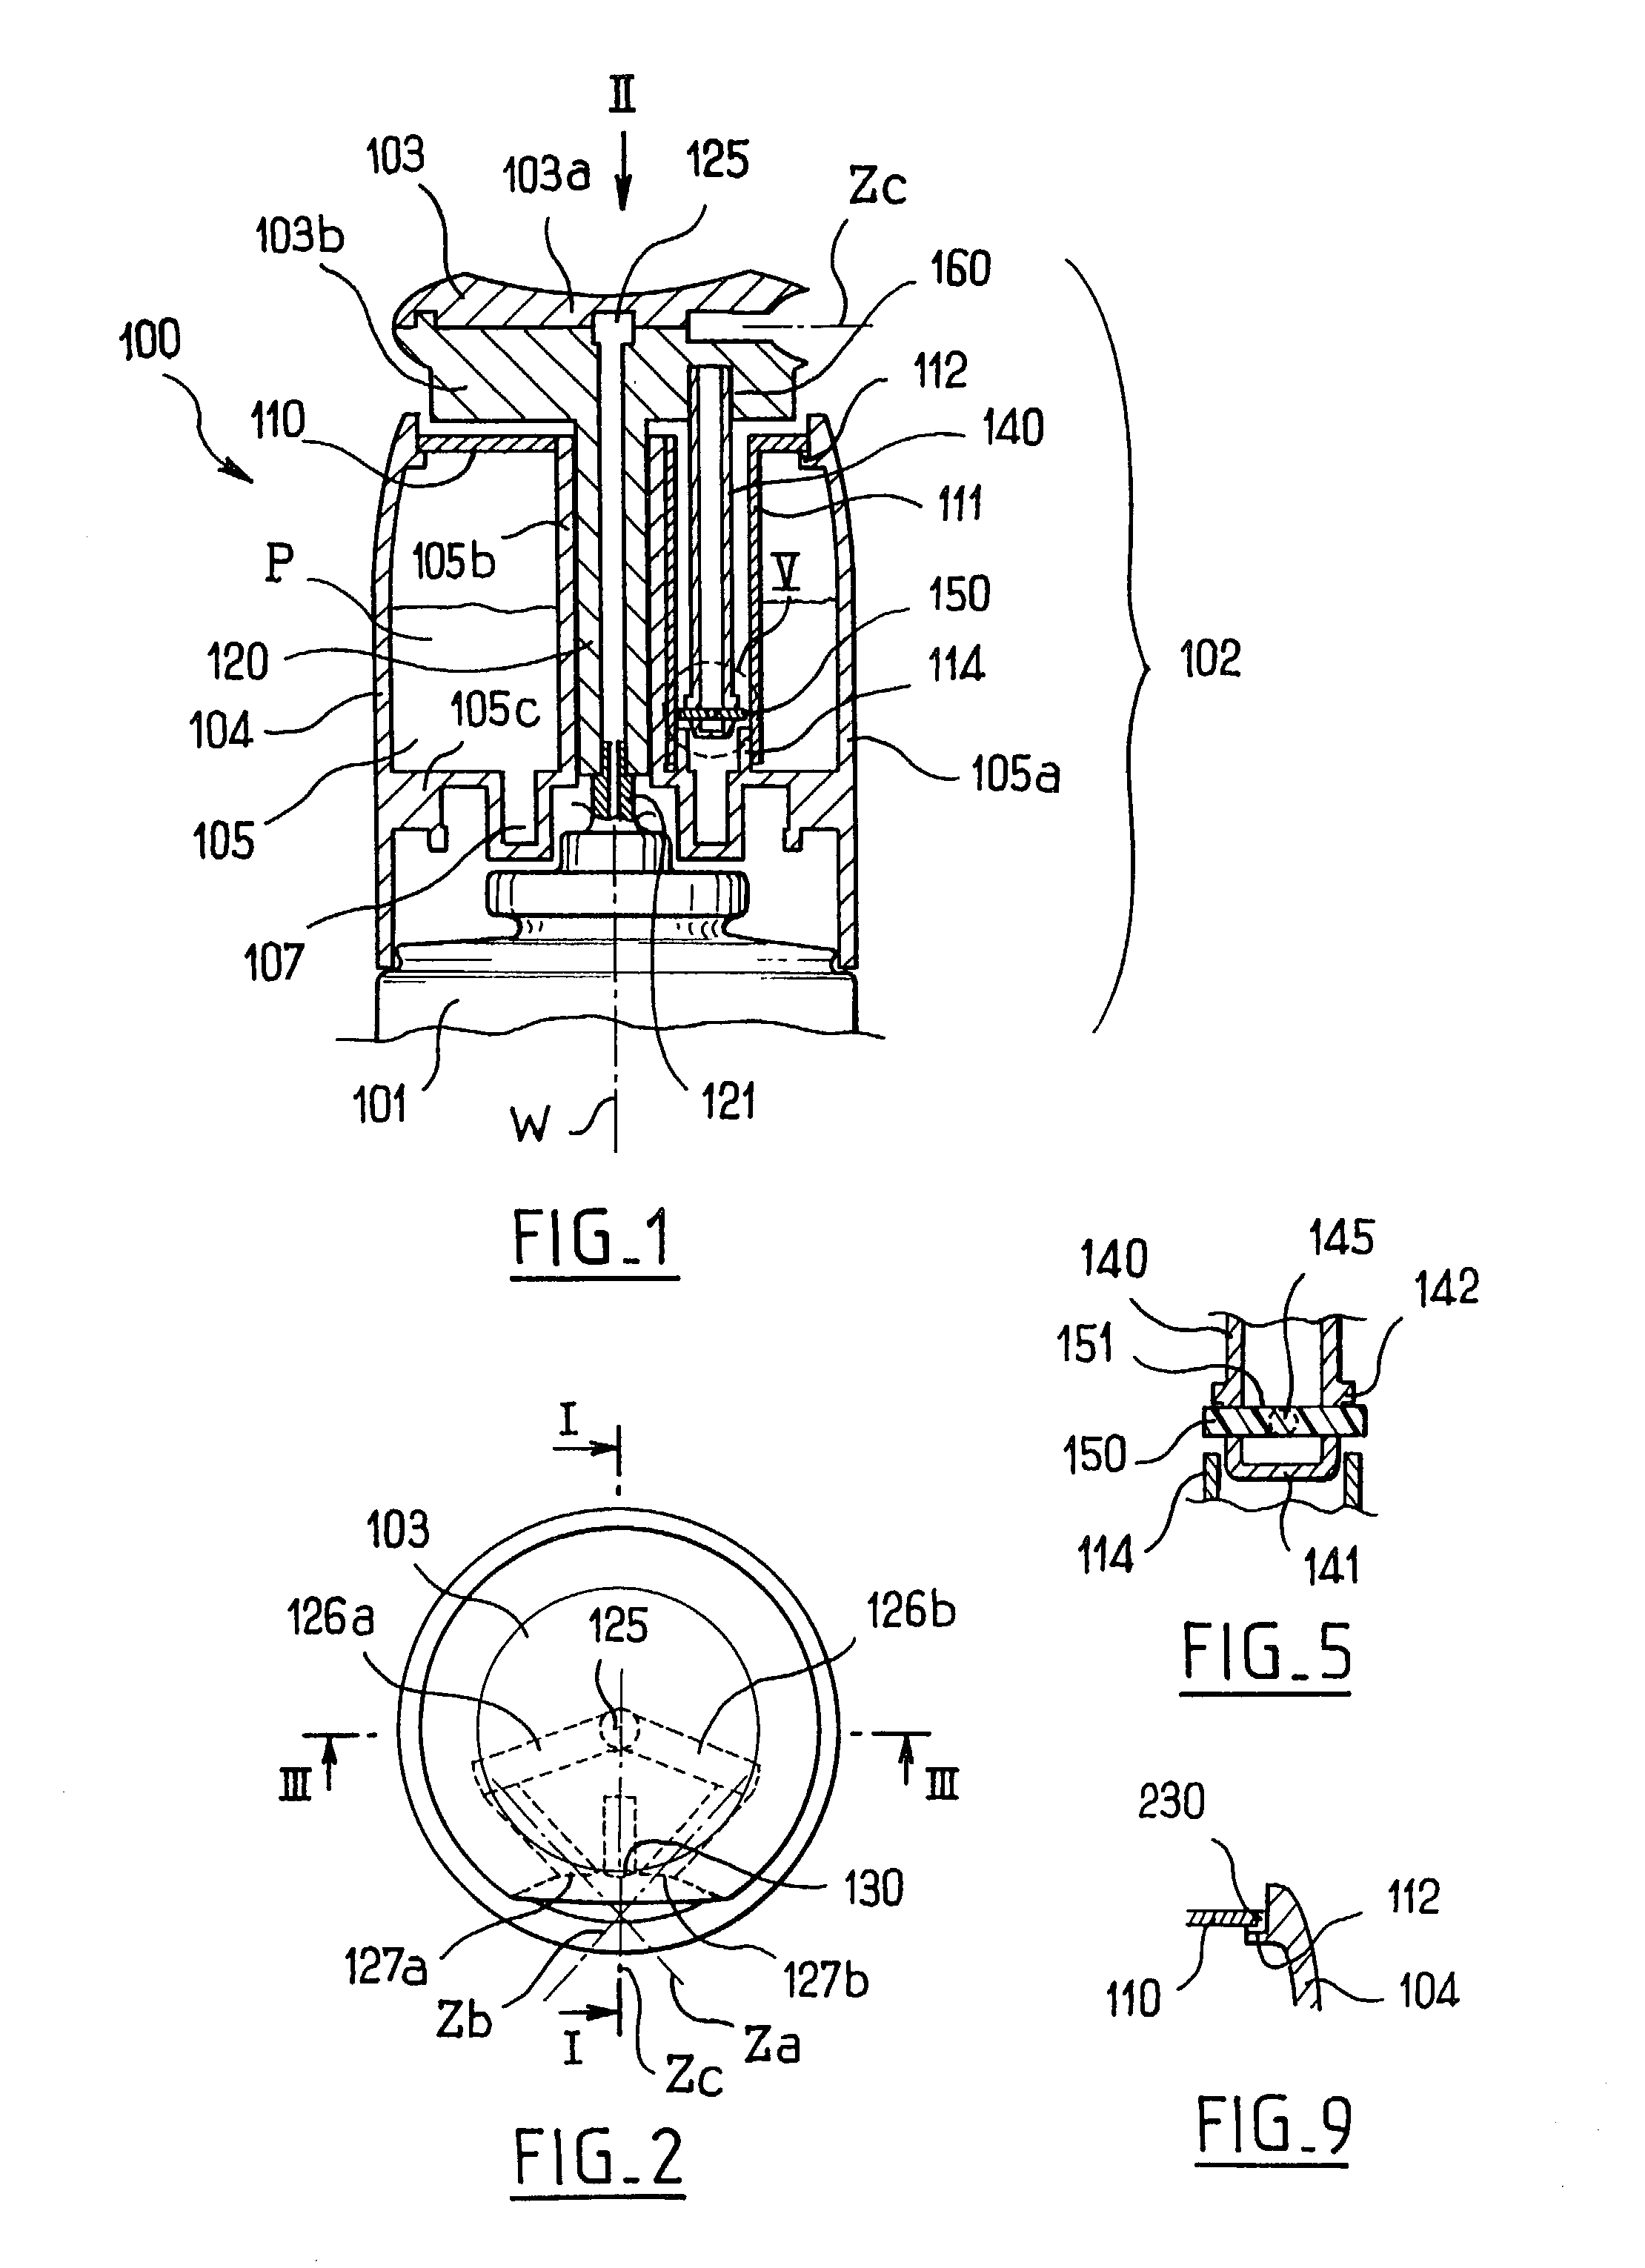 Device for spraying a substance onto a medium